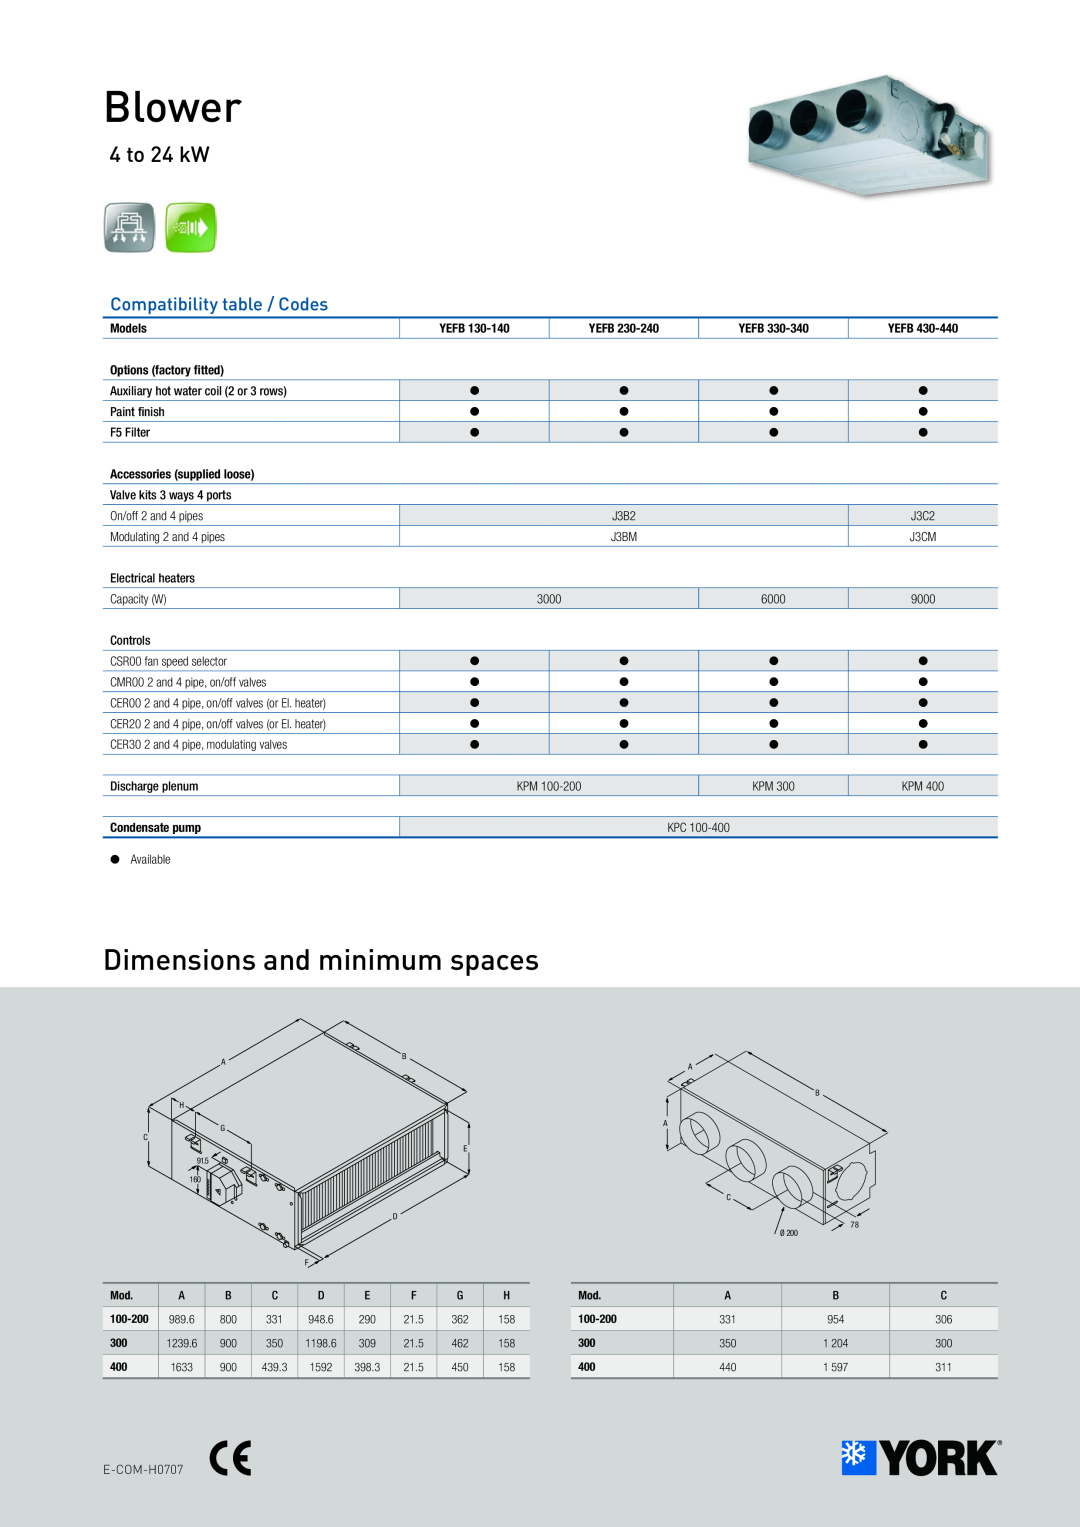 York CER00, CSR00, CMR00, CER20 manual Dimensions and minimum spaces, Compatibility table / Codes, Blower, 4 to 24 kW 